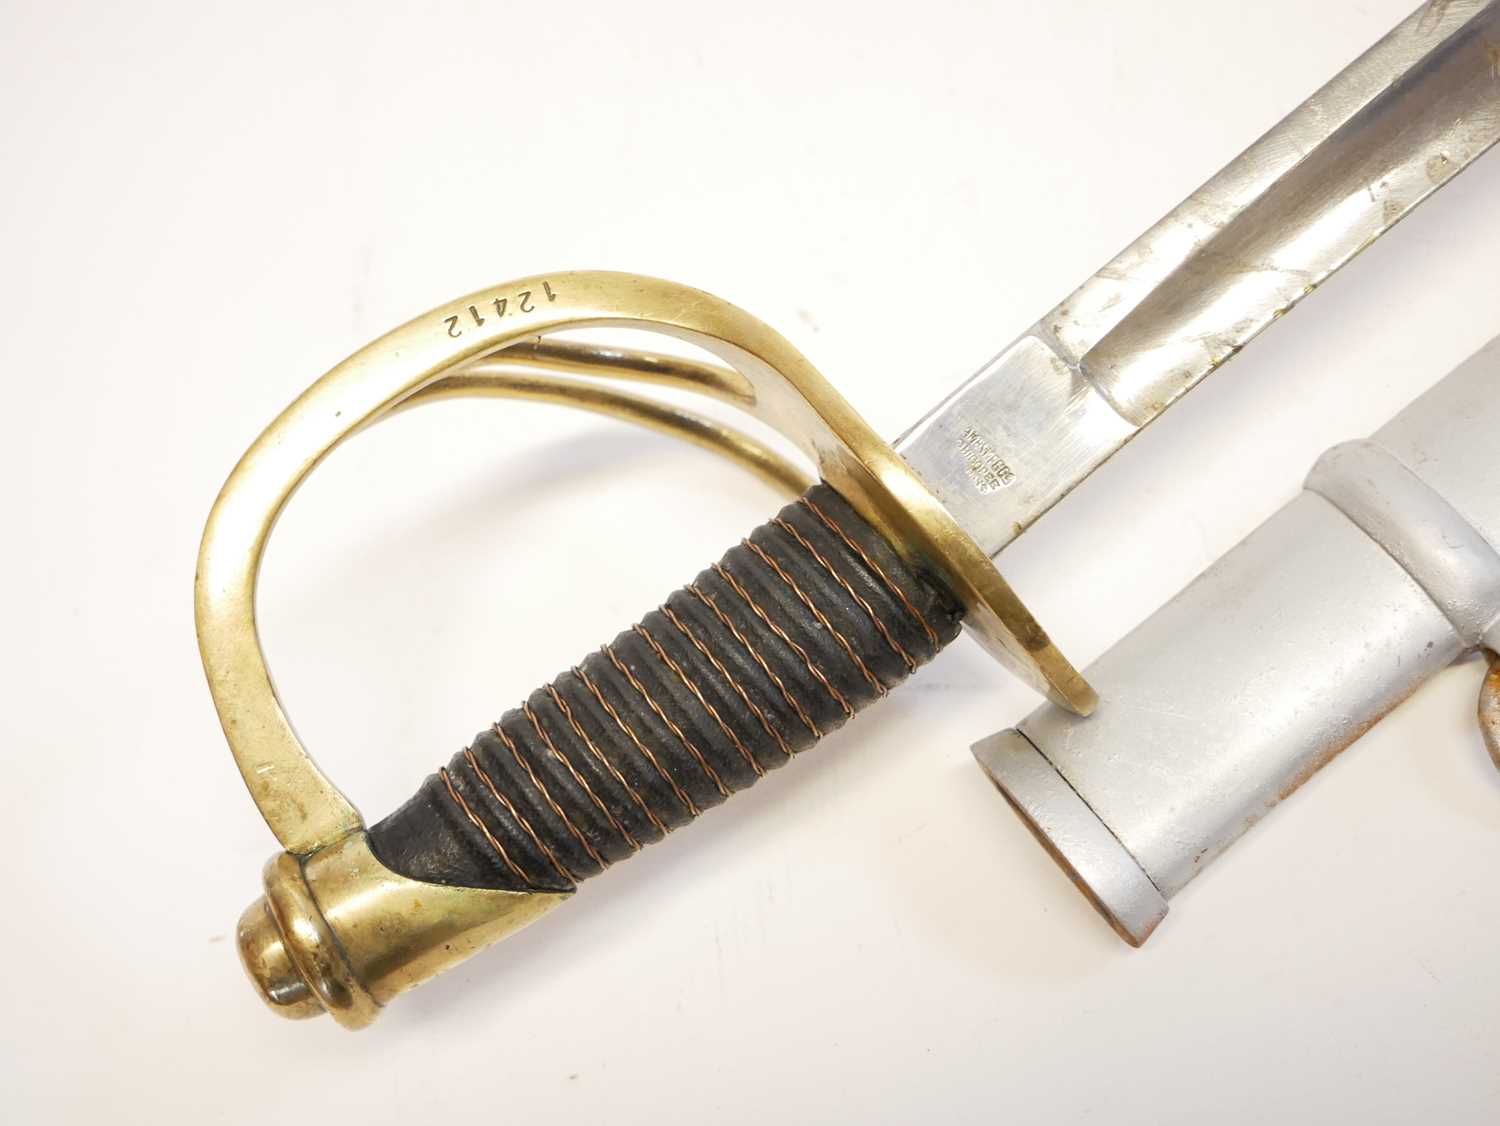 Reproduction US wrist breaker cavalry sabre and scabbard, curved fullered blade with brass guard and - Image 8 of 11